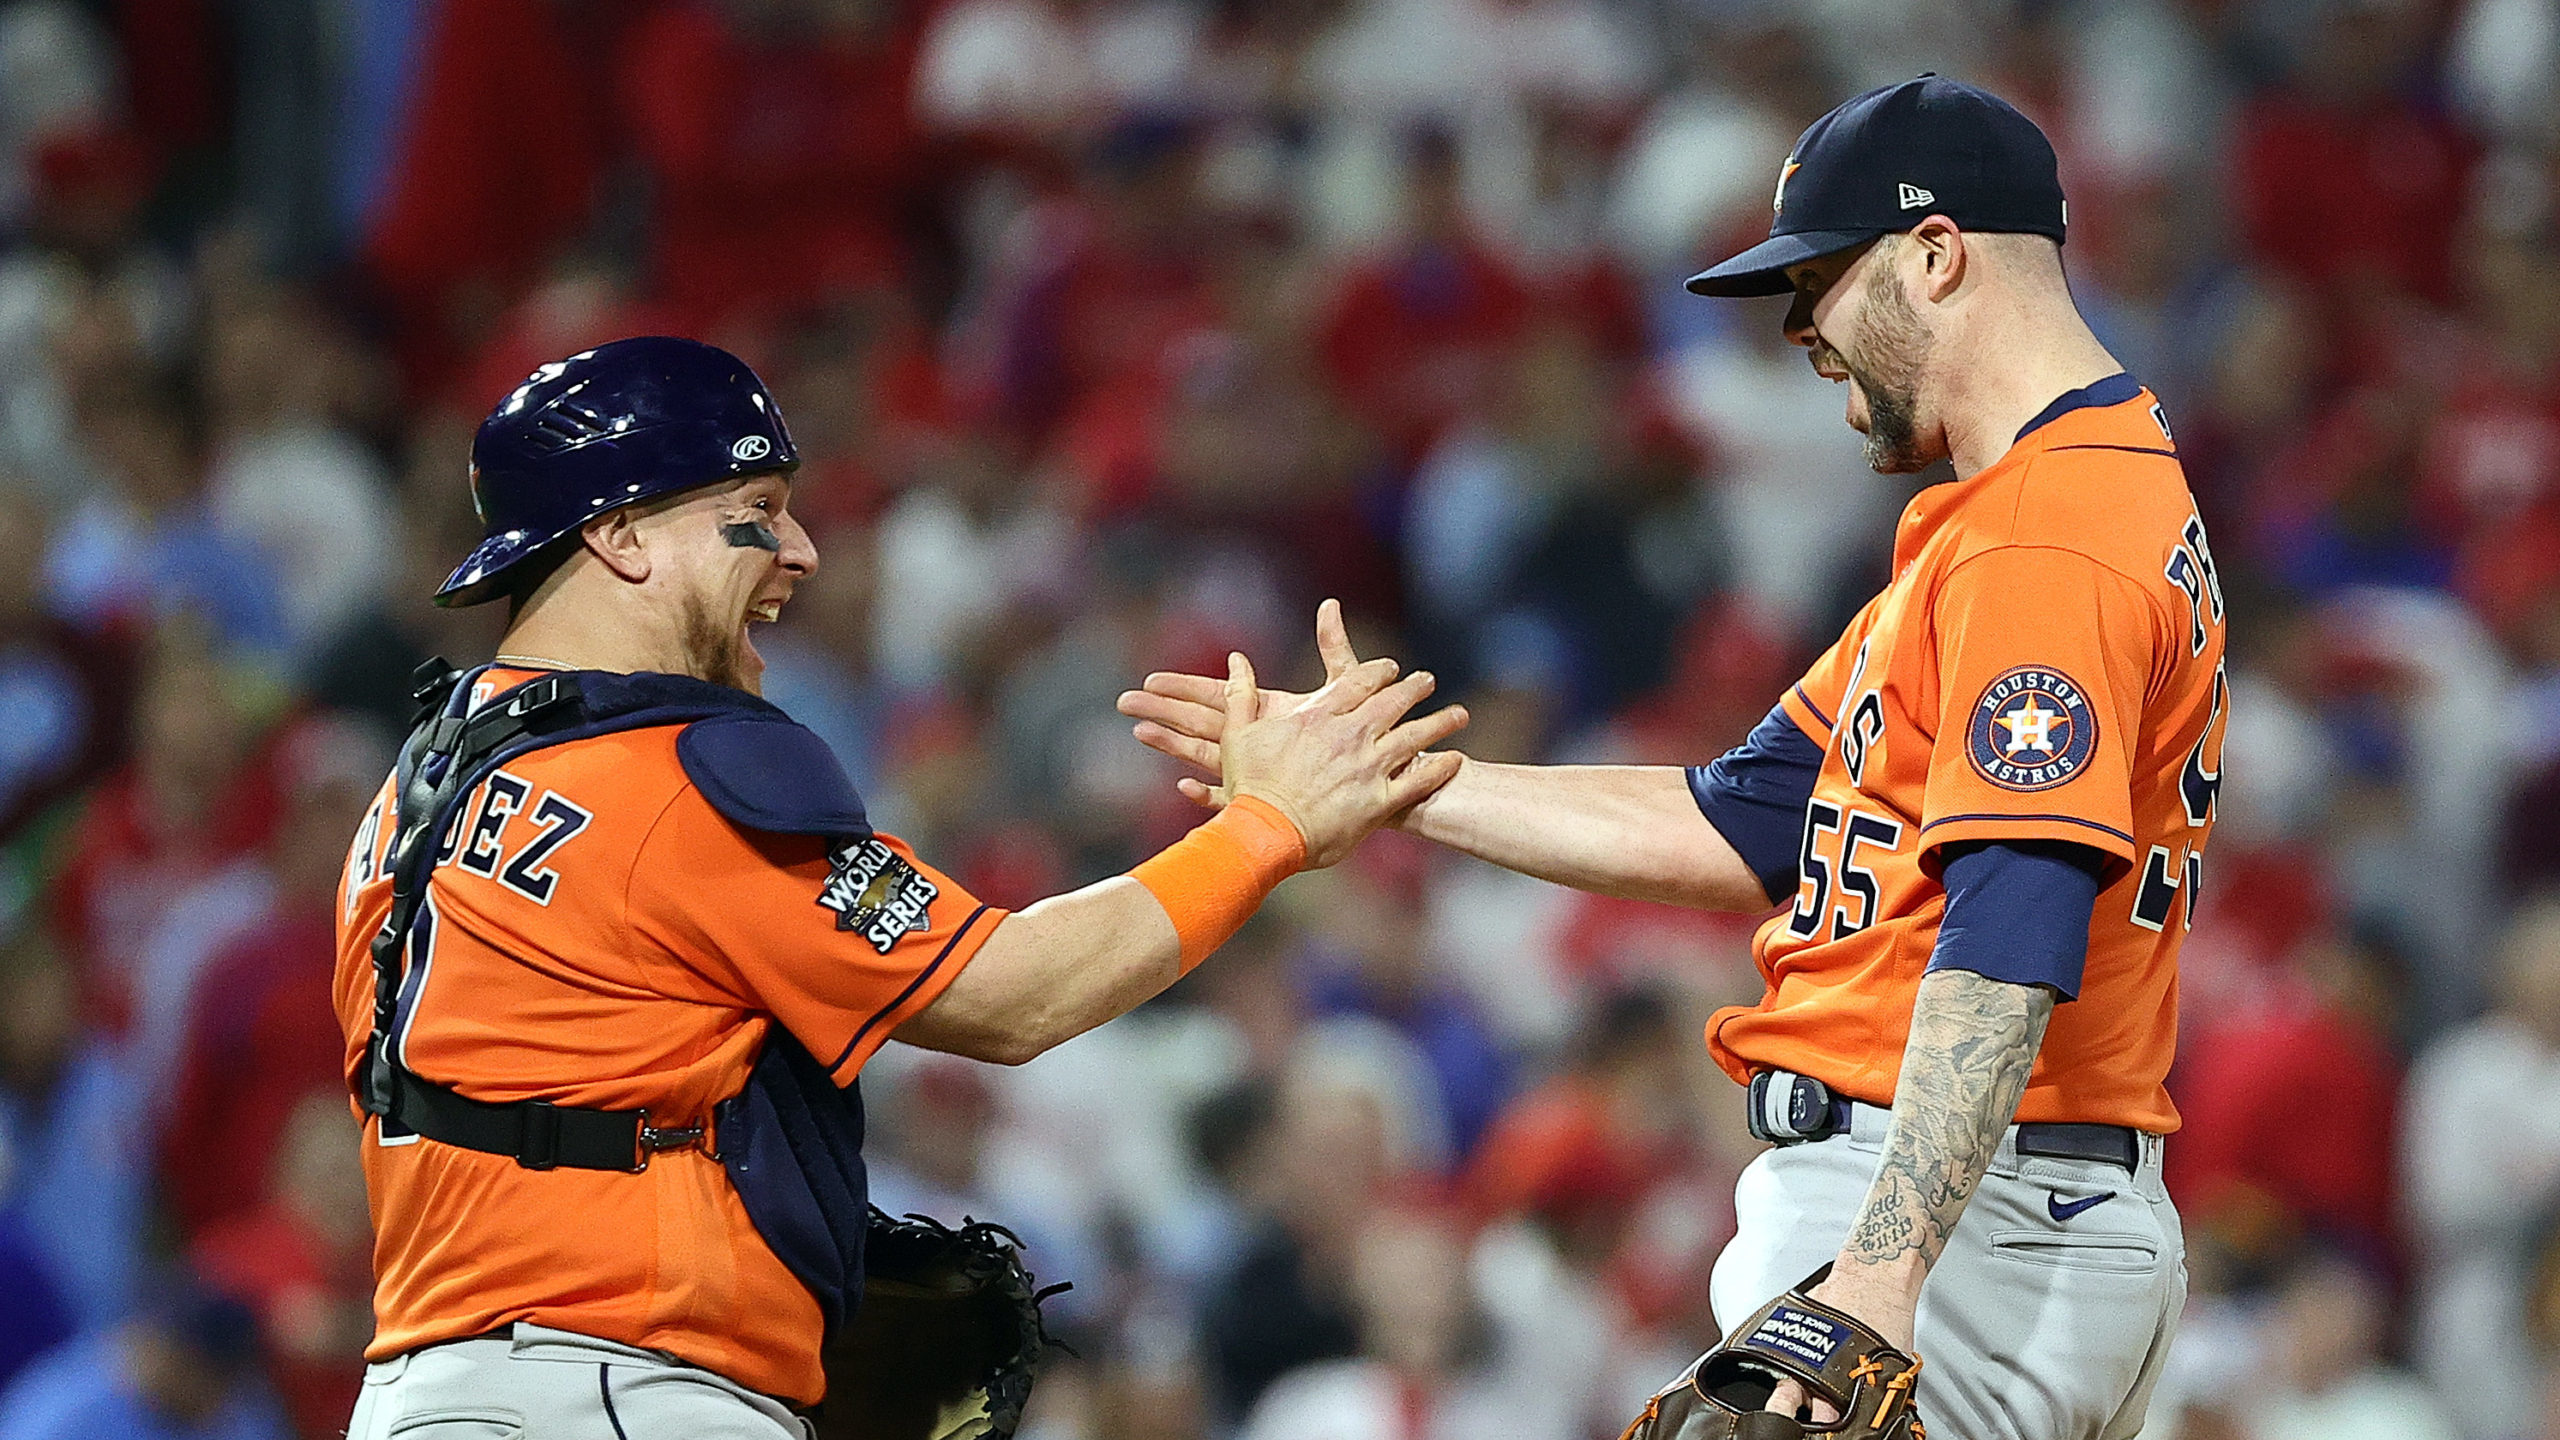 Christian Vazquez #9 and Ryan Pressly #55 of the Houston Astros celebrate a combined no-hitter to d...